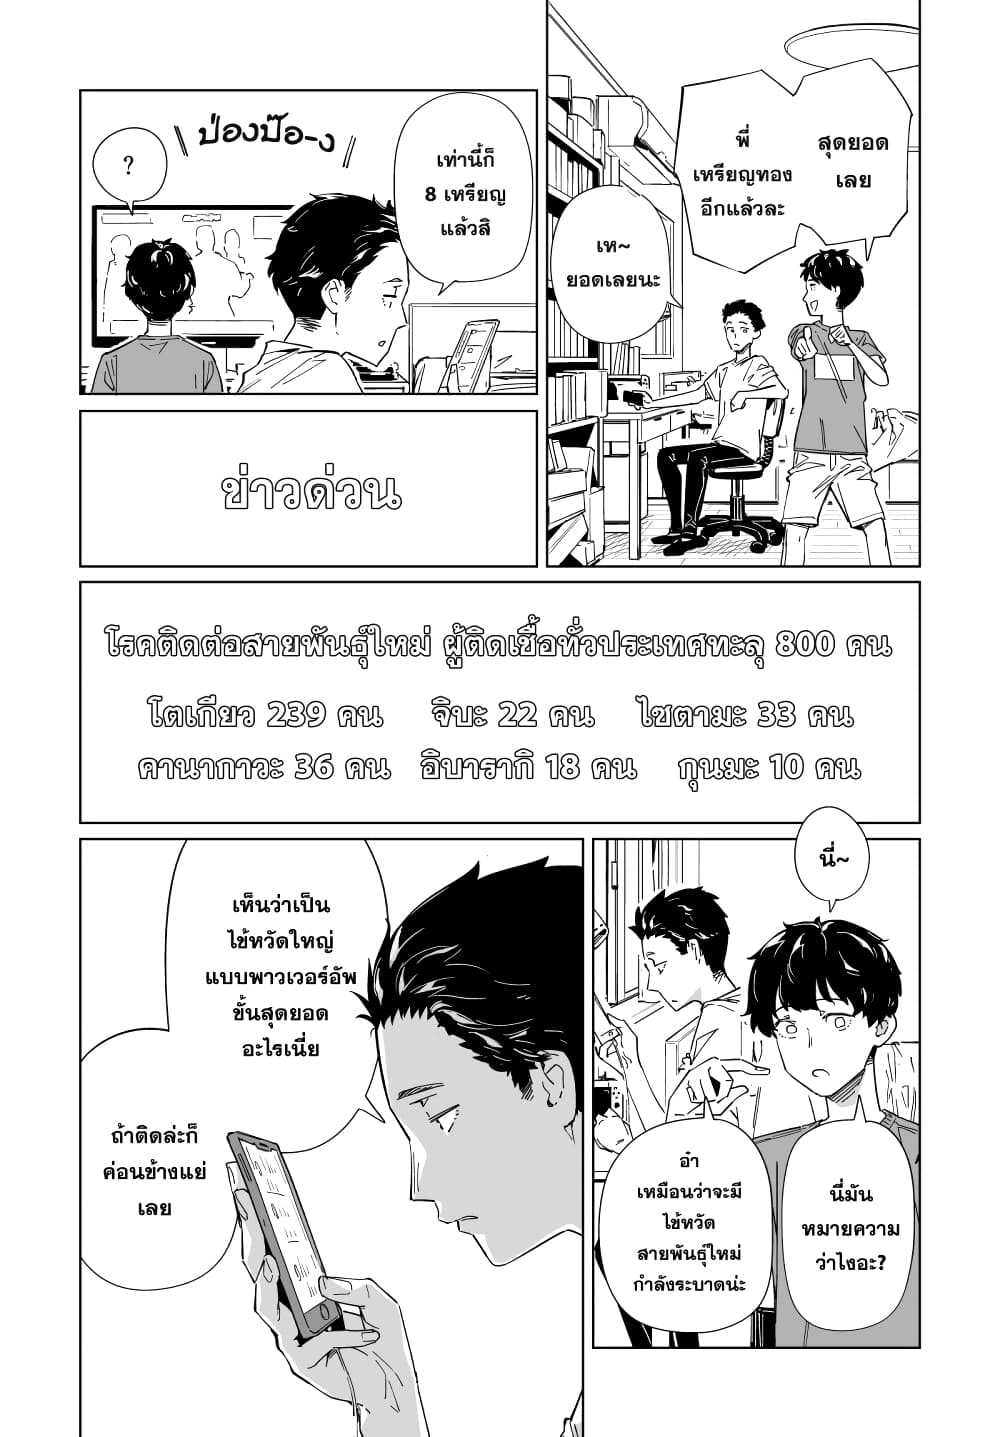 New Normal 11 (5)